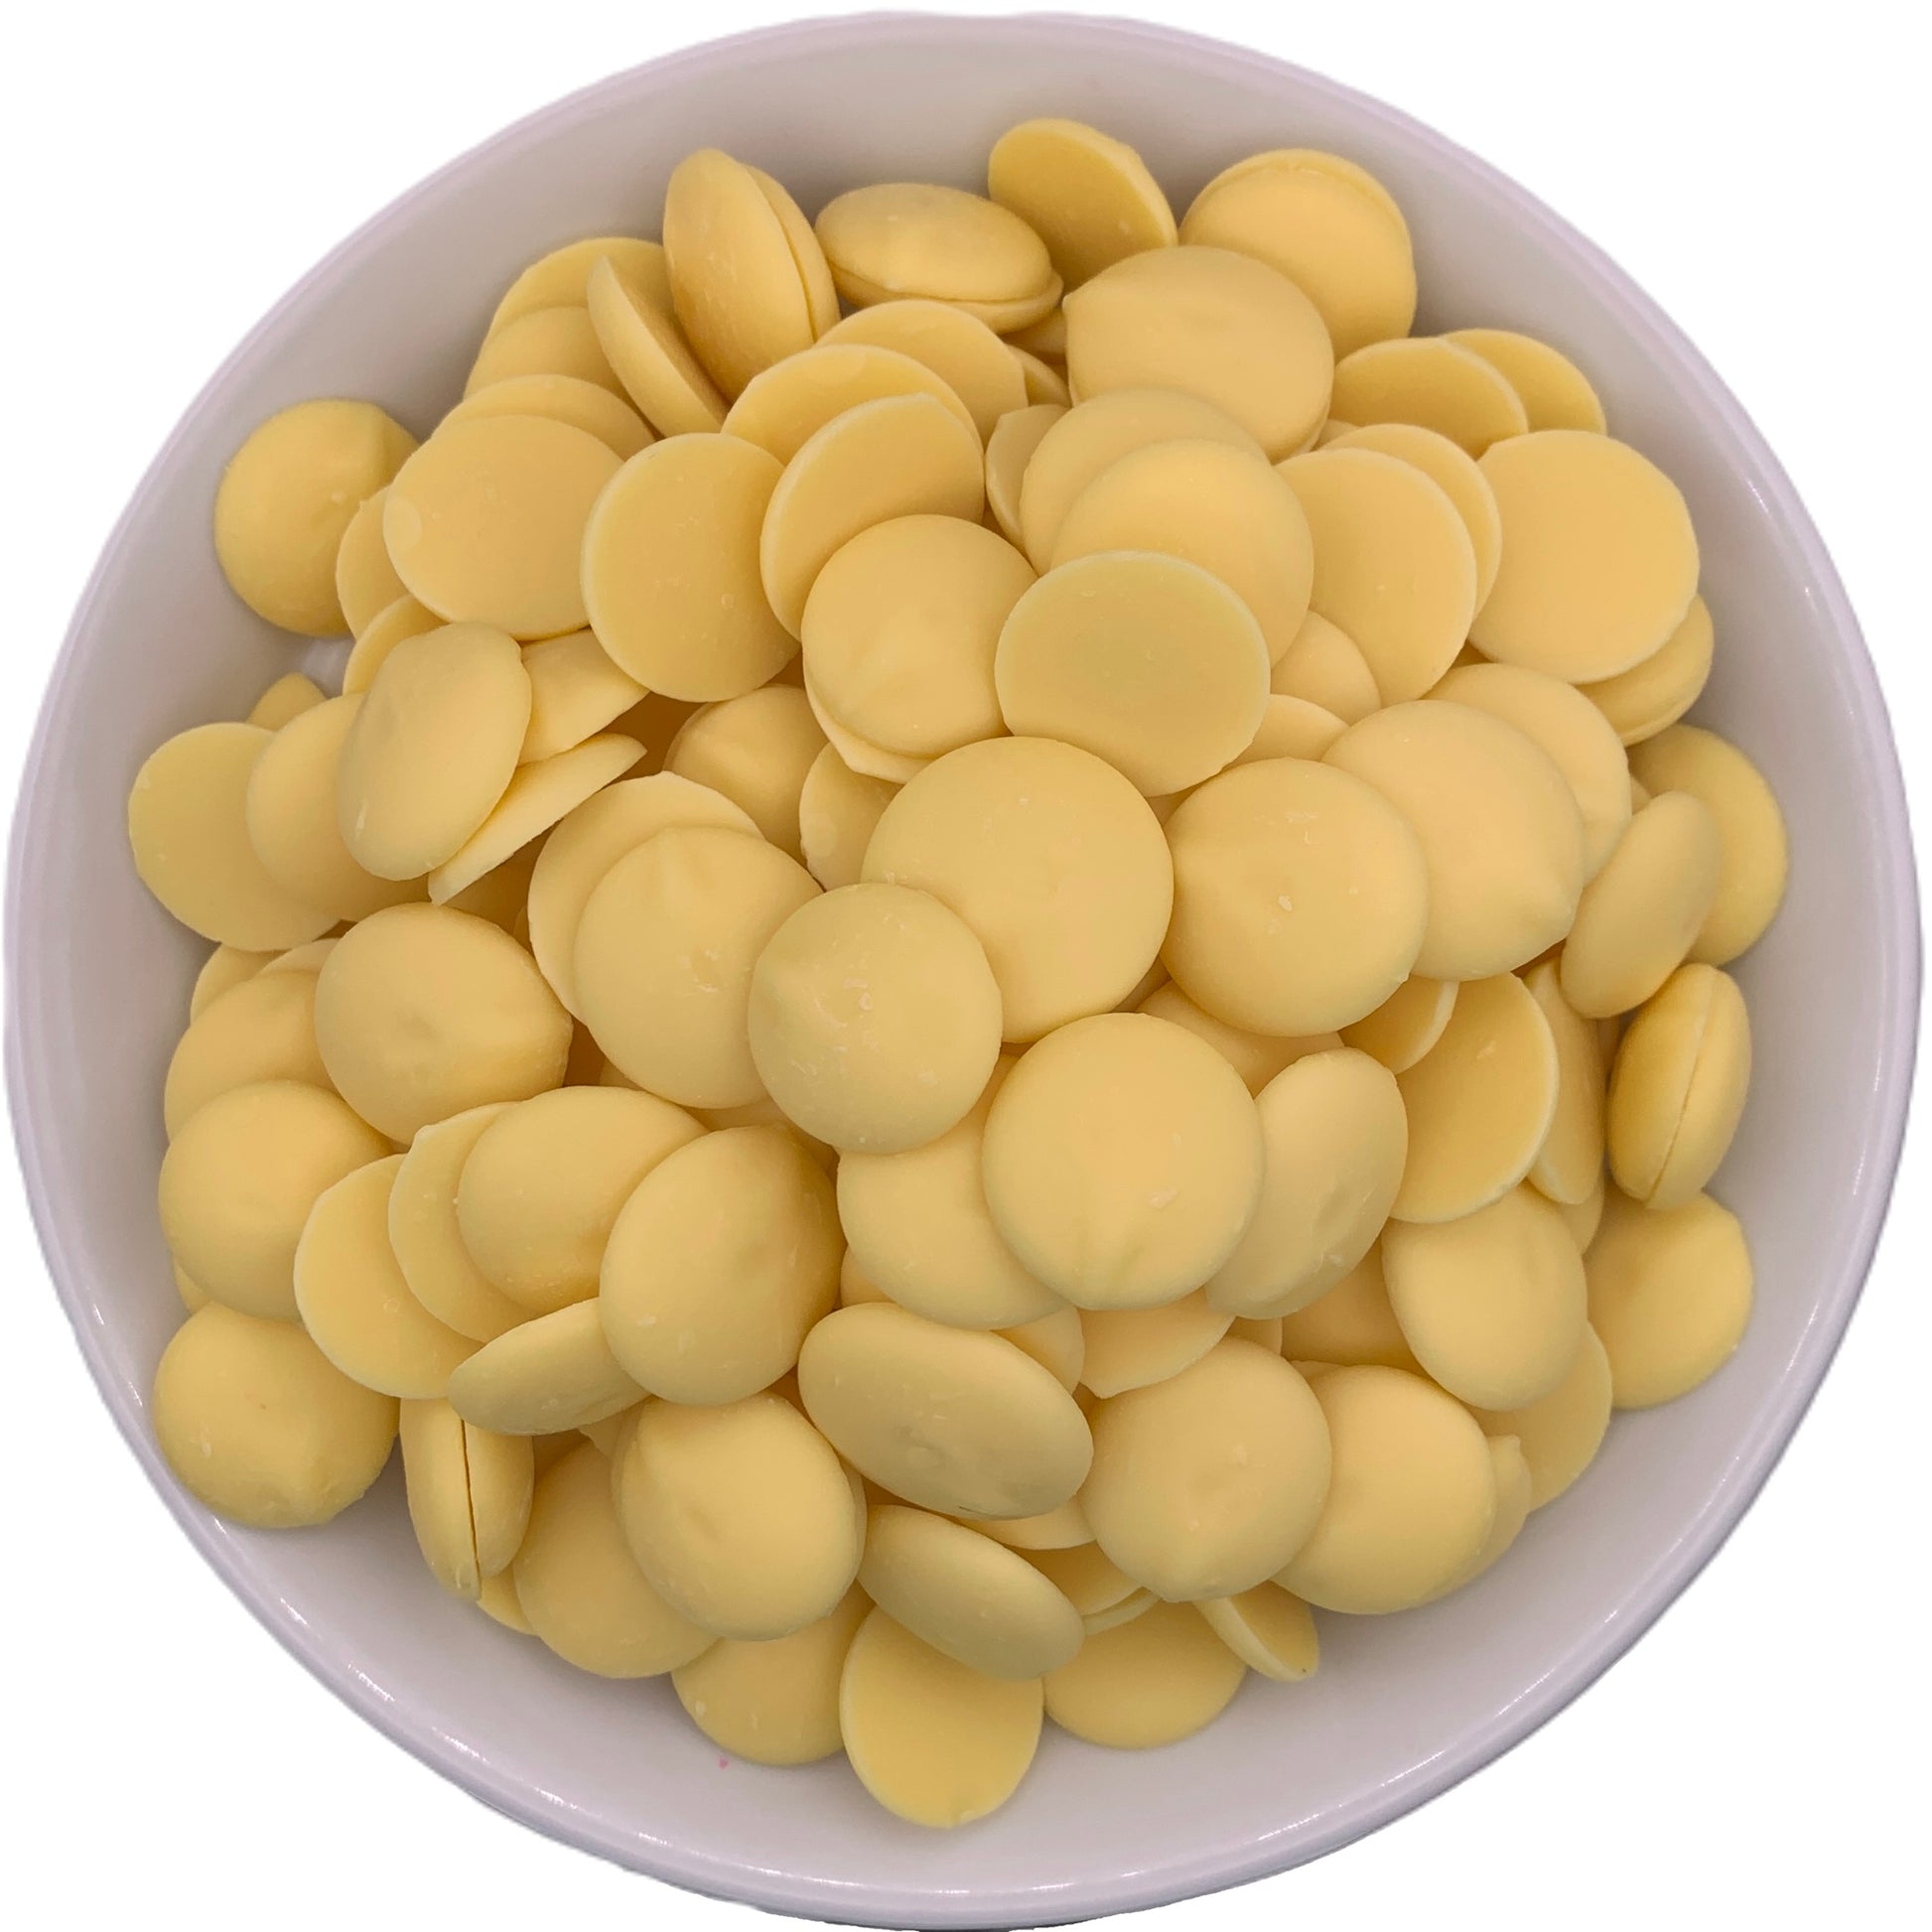 Directly above view of a white bowl filled with Merckens yellow chocolate melting wafers, emphasizing the light yellow color for a cheerful addition to baking creations.